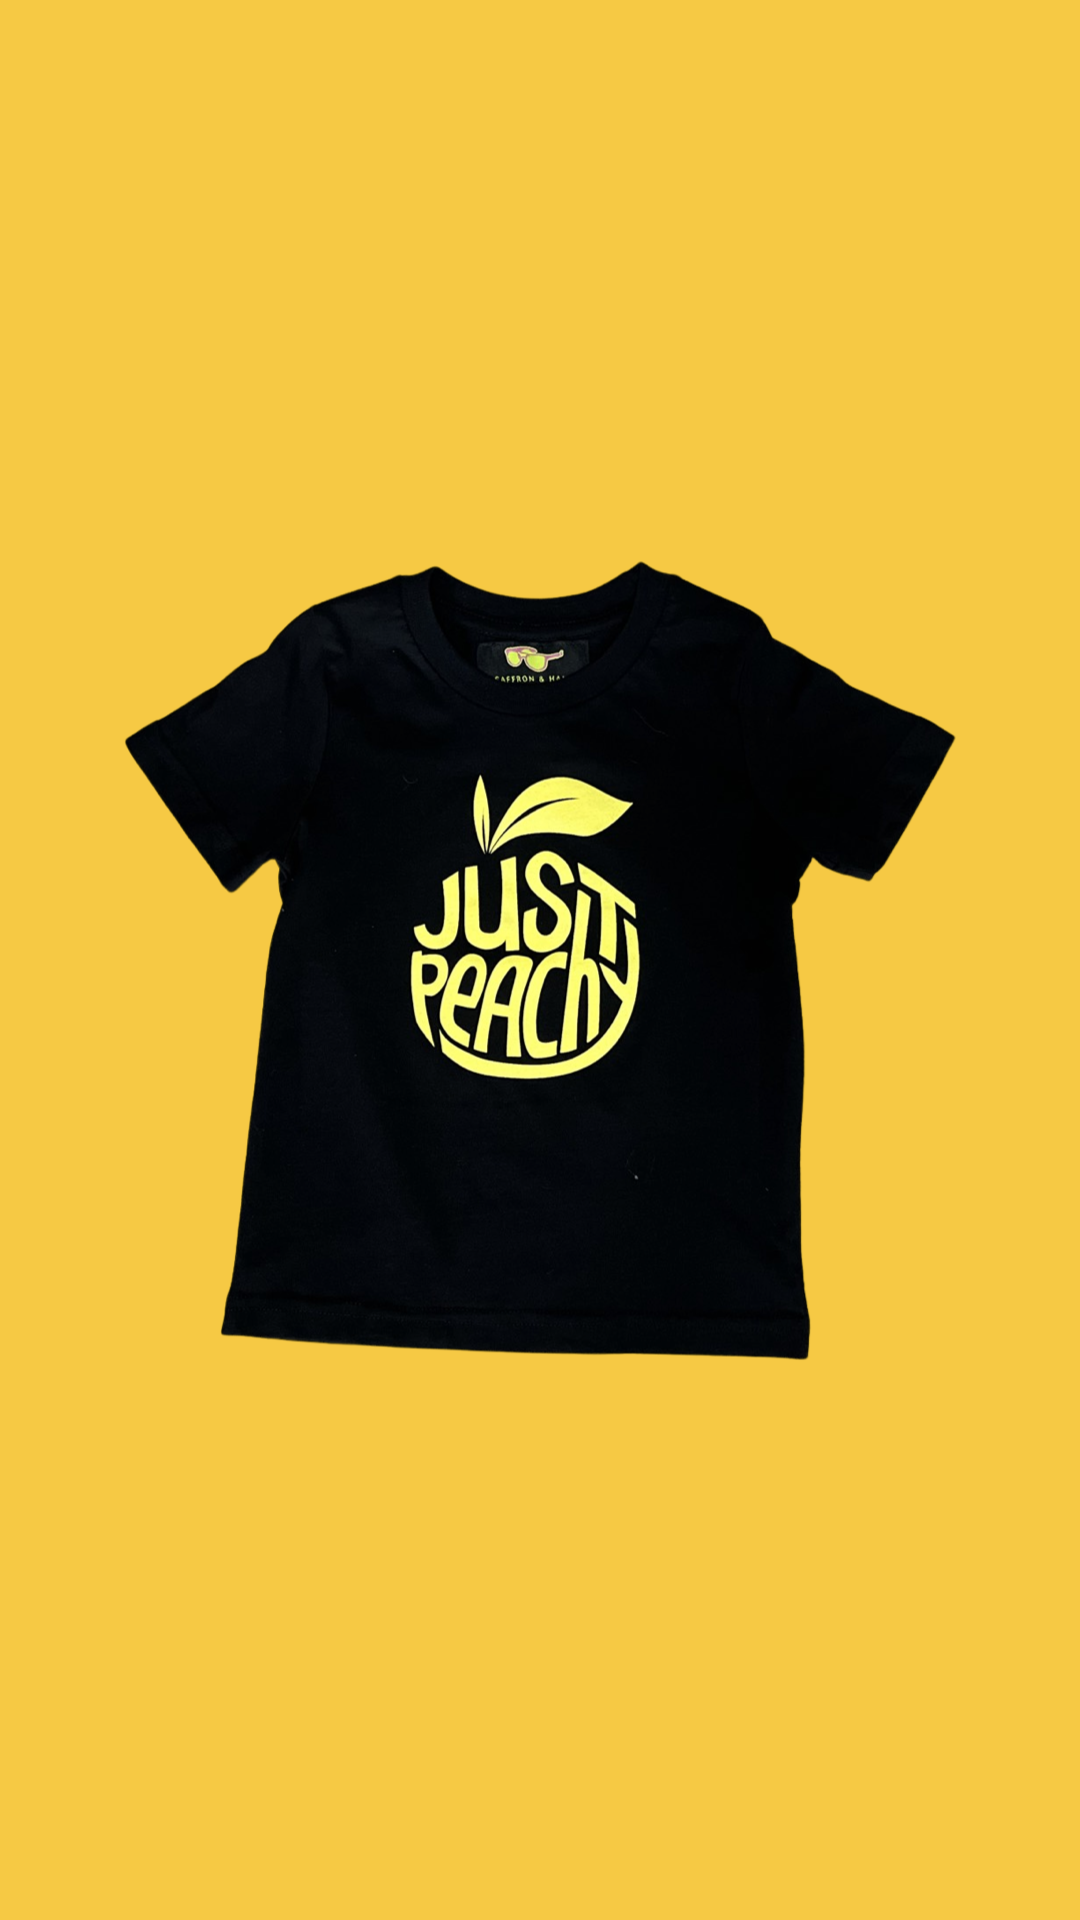 Just Peachy Kids T-Shirt- Black with Yellow